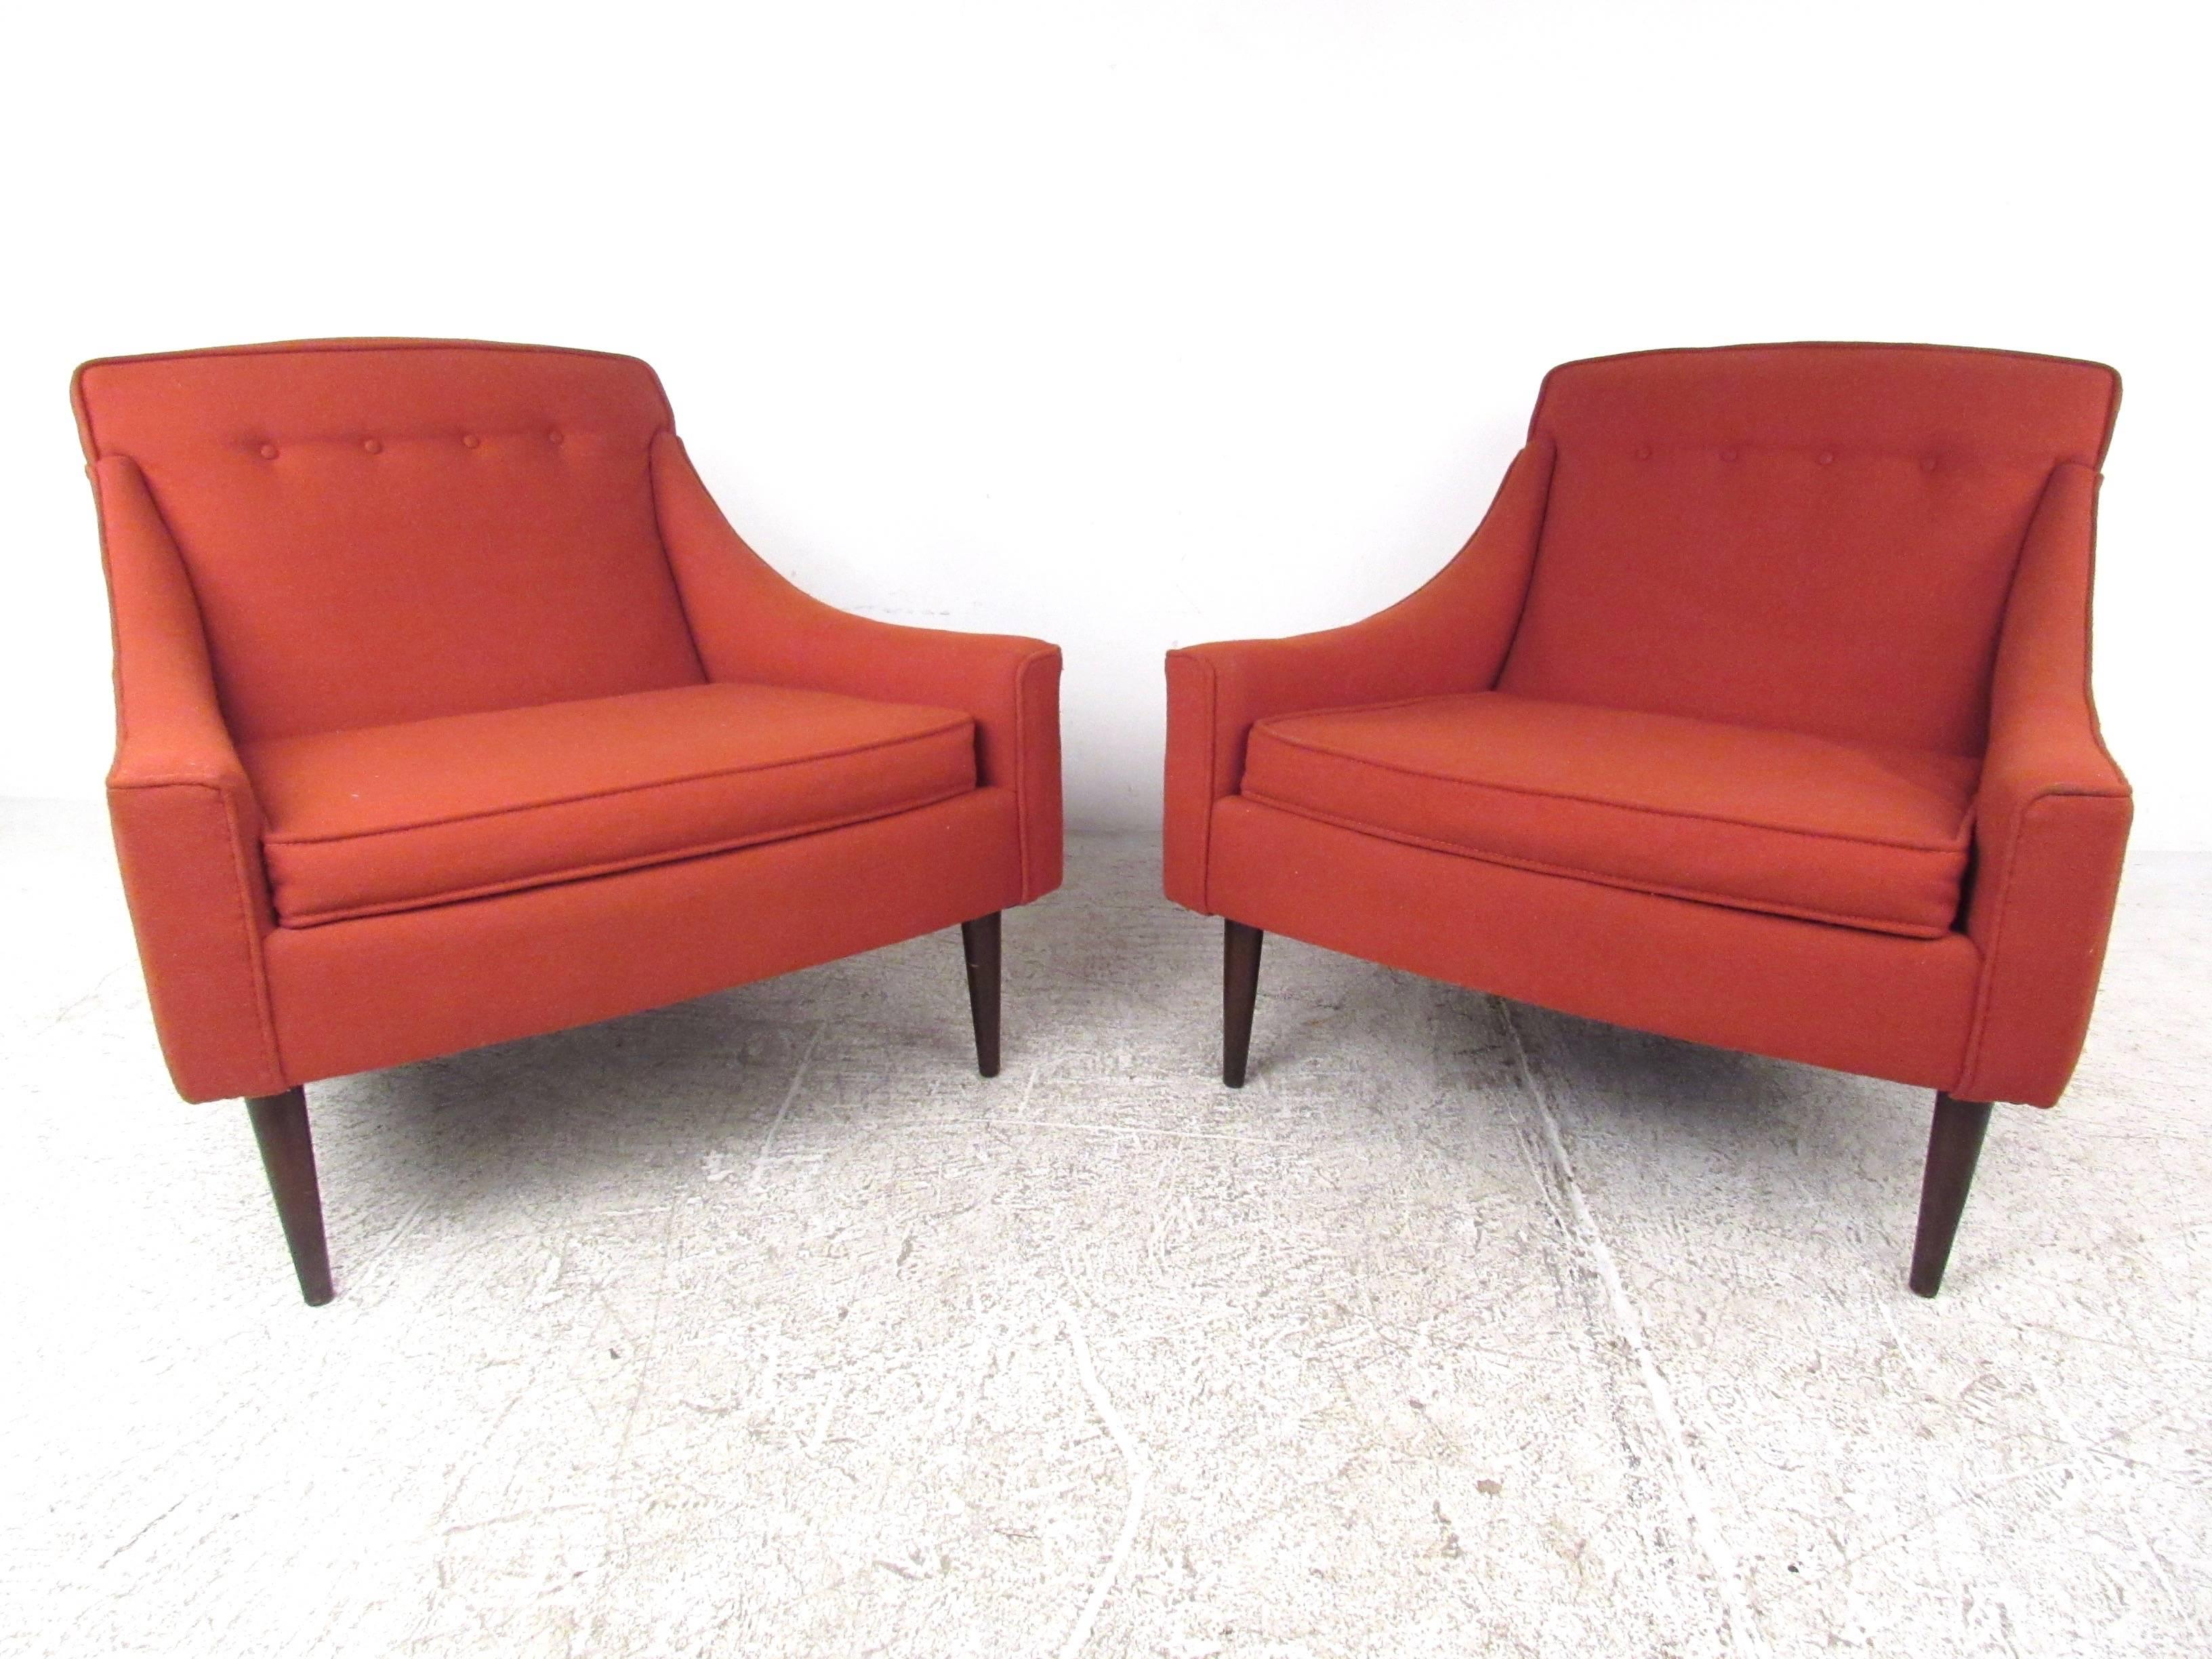 Upholstery Pair of Stylish Mid-Century Modern Lounge Chairs